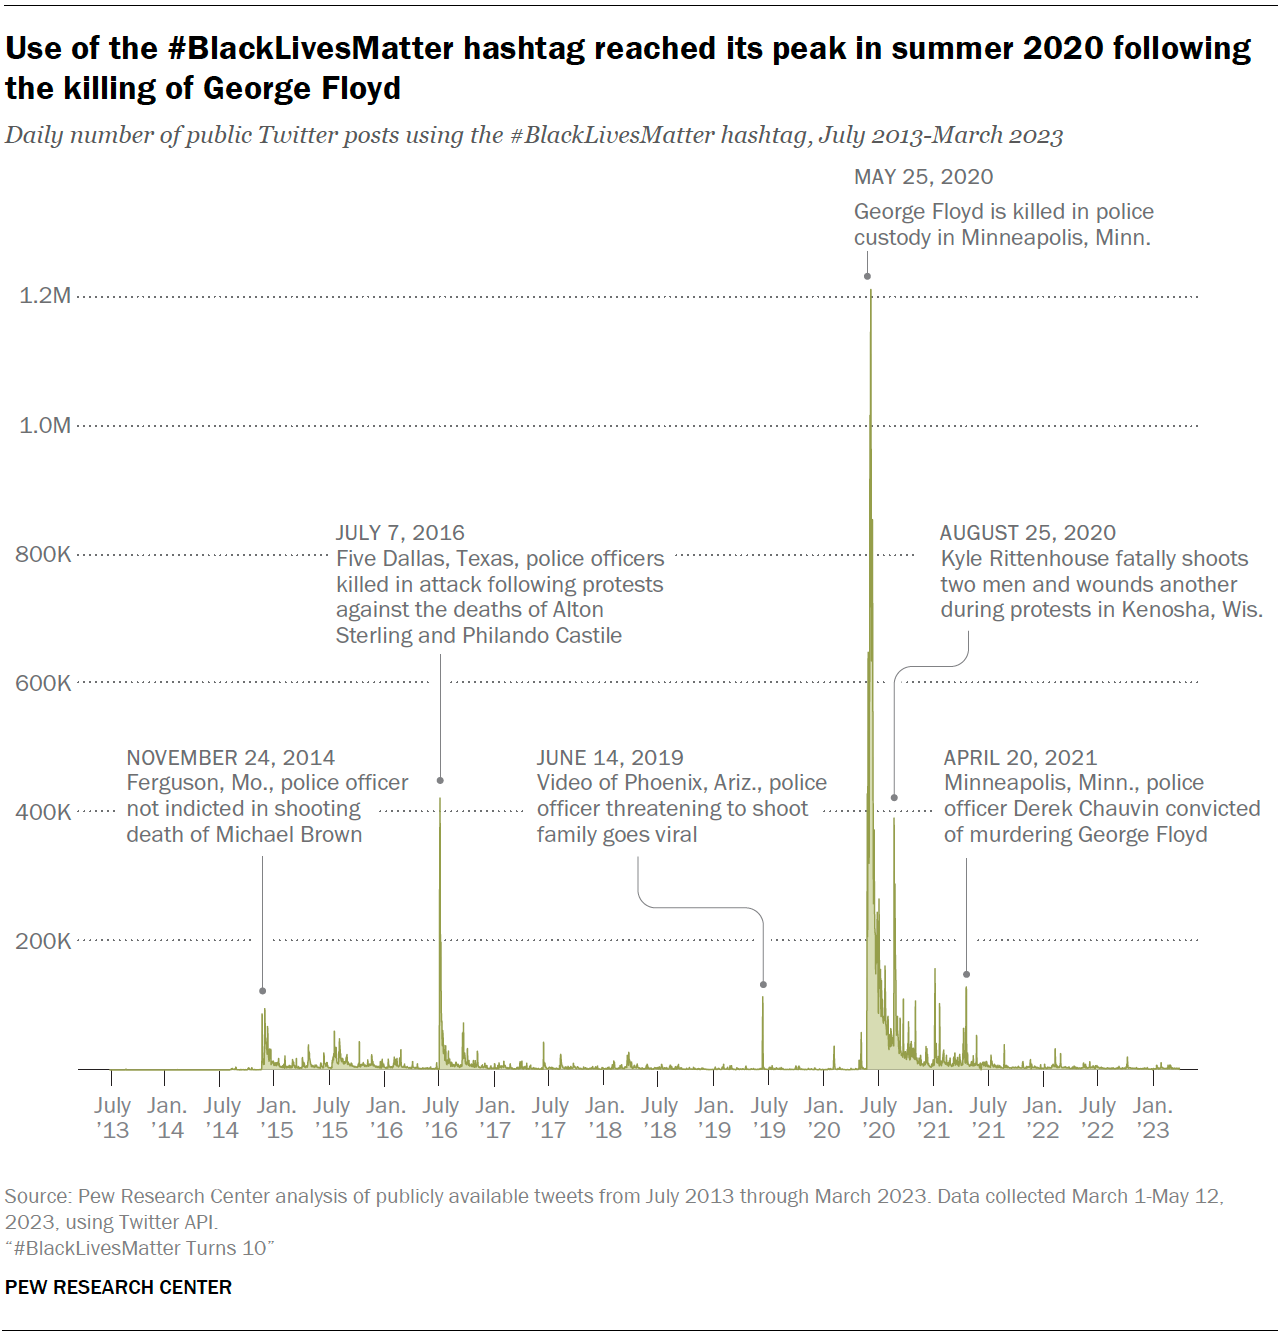 A chart showing that the Use of the #BlackLivesMatter hashtag reached its peak in summer 2020 following the killing of George Floyd